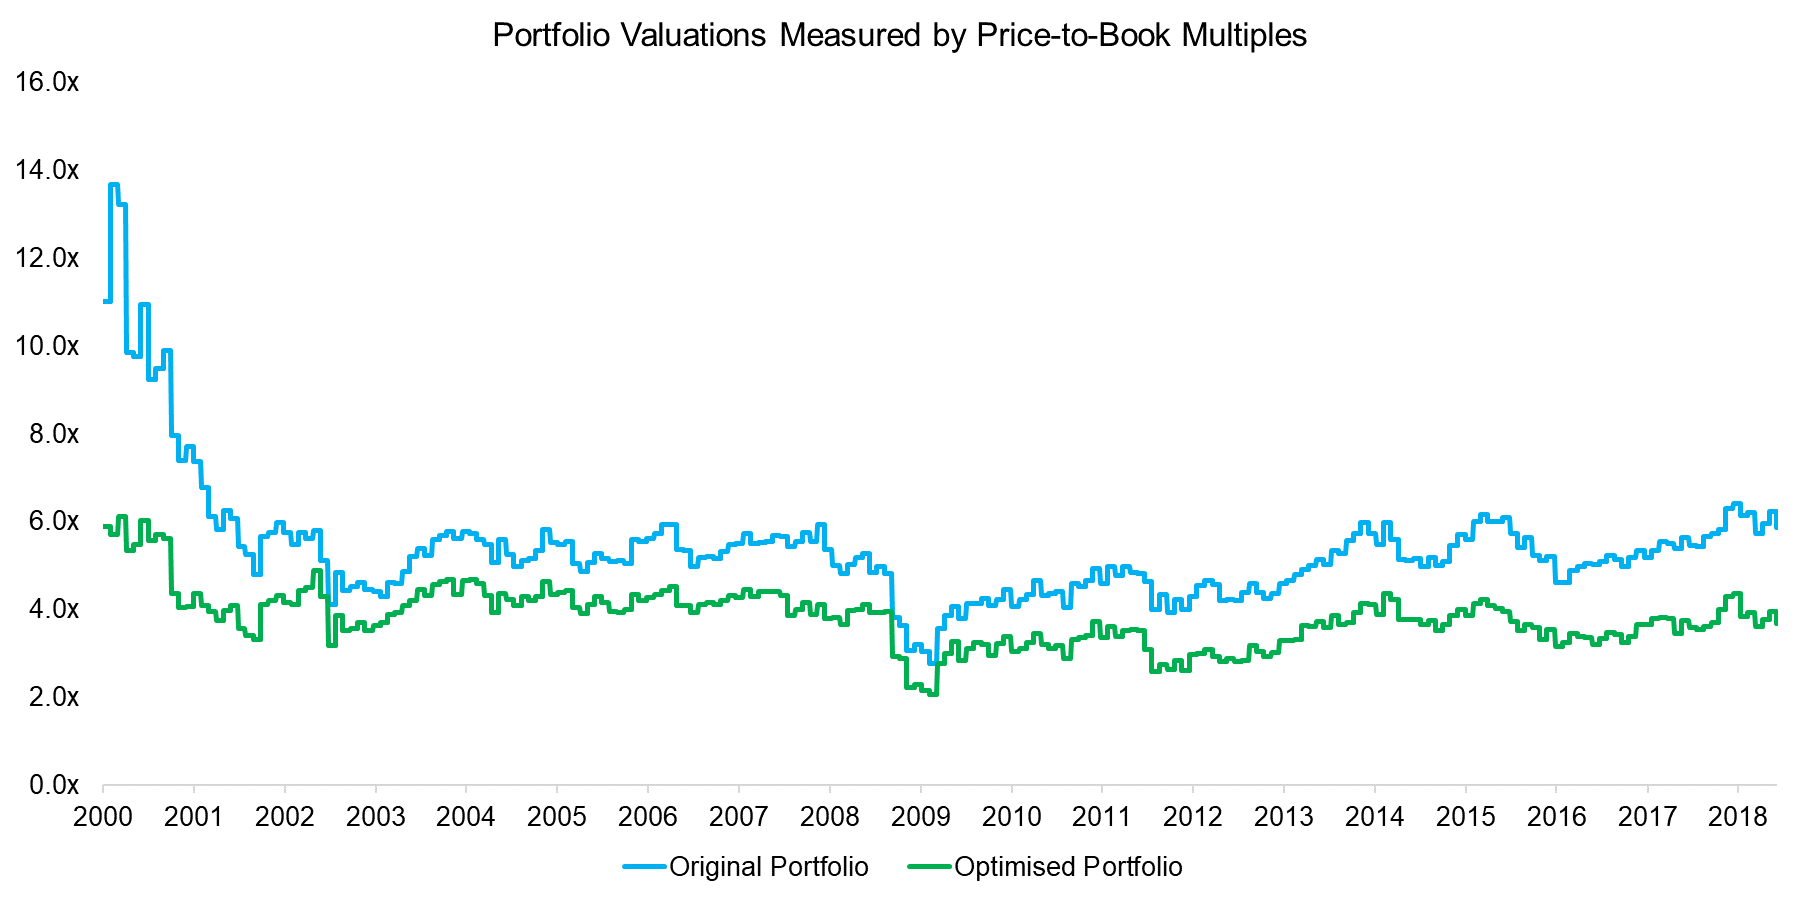 Portfolio Valuations Measured by Price-to-Book Multiples